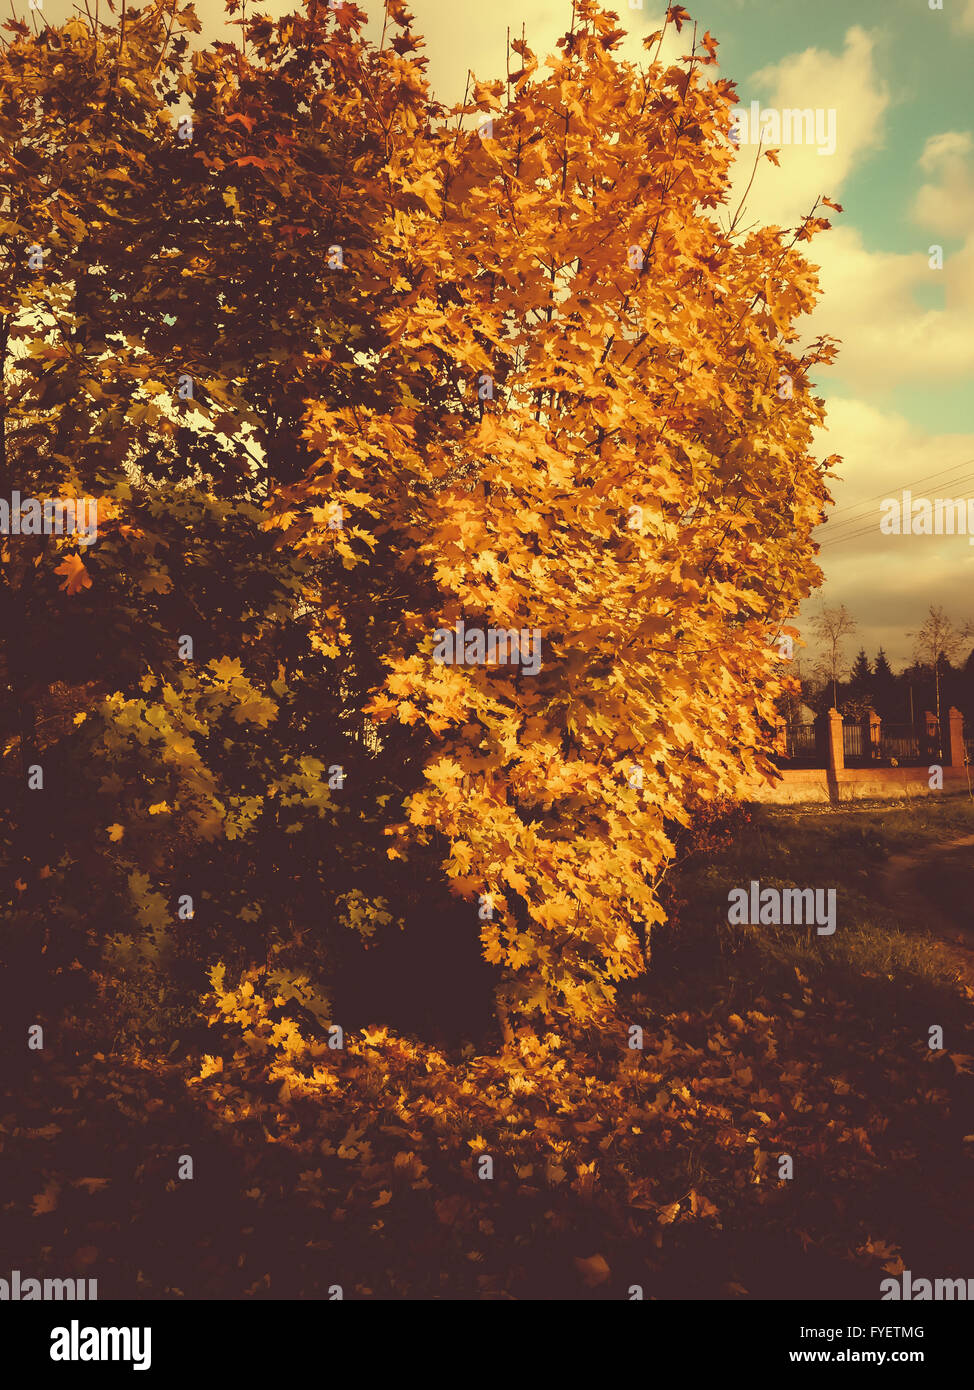 Tree with golden leaves in autumn park. Stock Photo